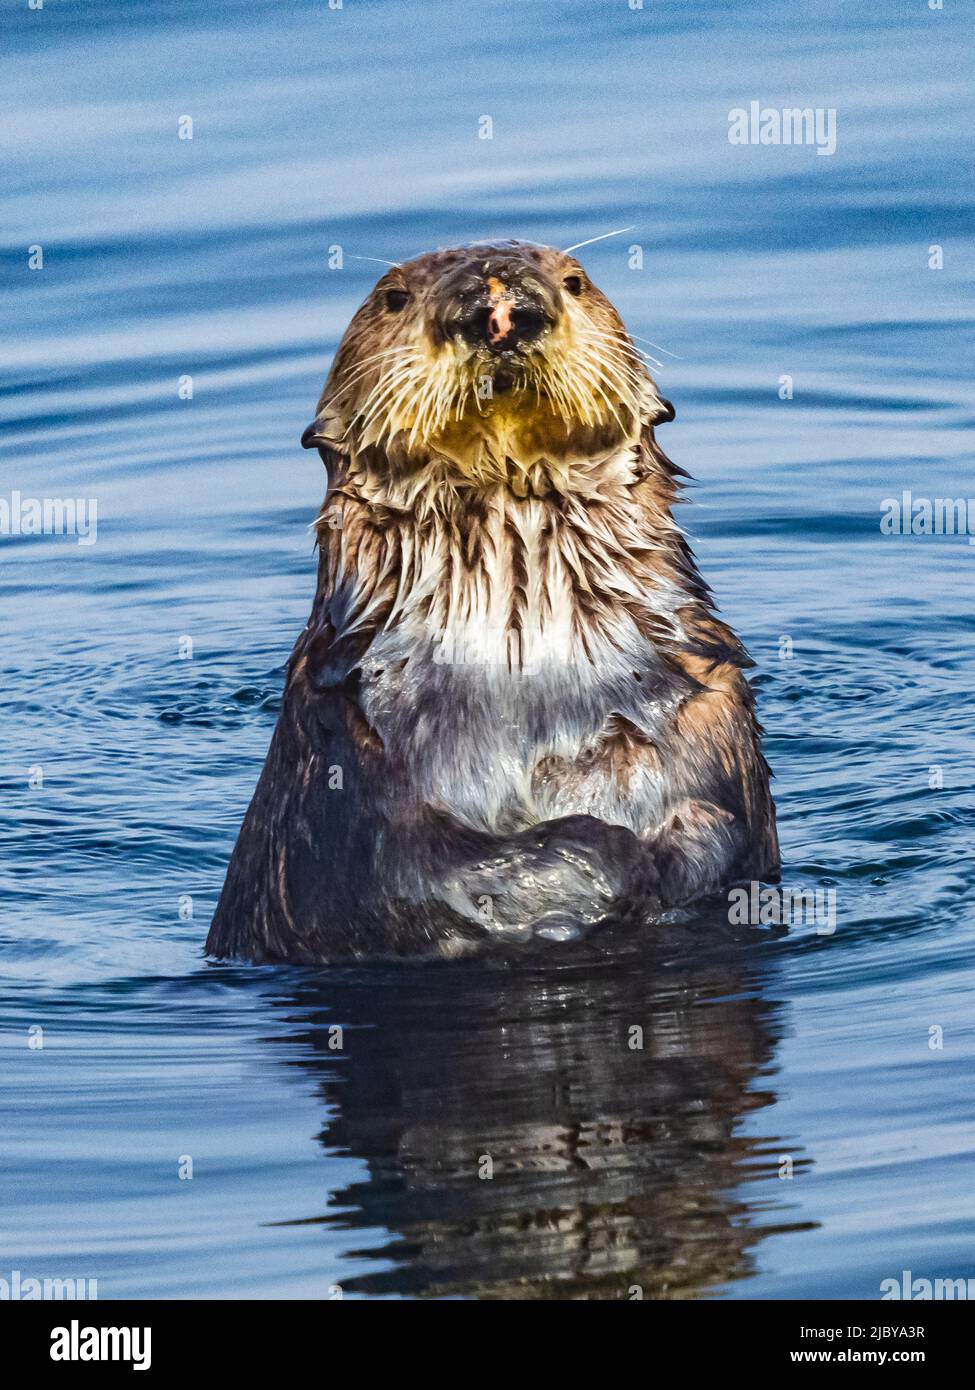 Curious Southern Sea Otter (Enhydra lutris) in Montrey Bay boat harbor, Monterey, California Stock Photo